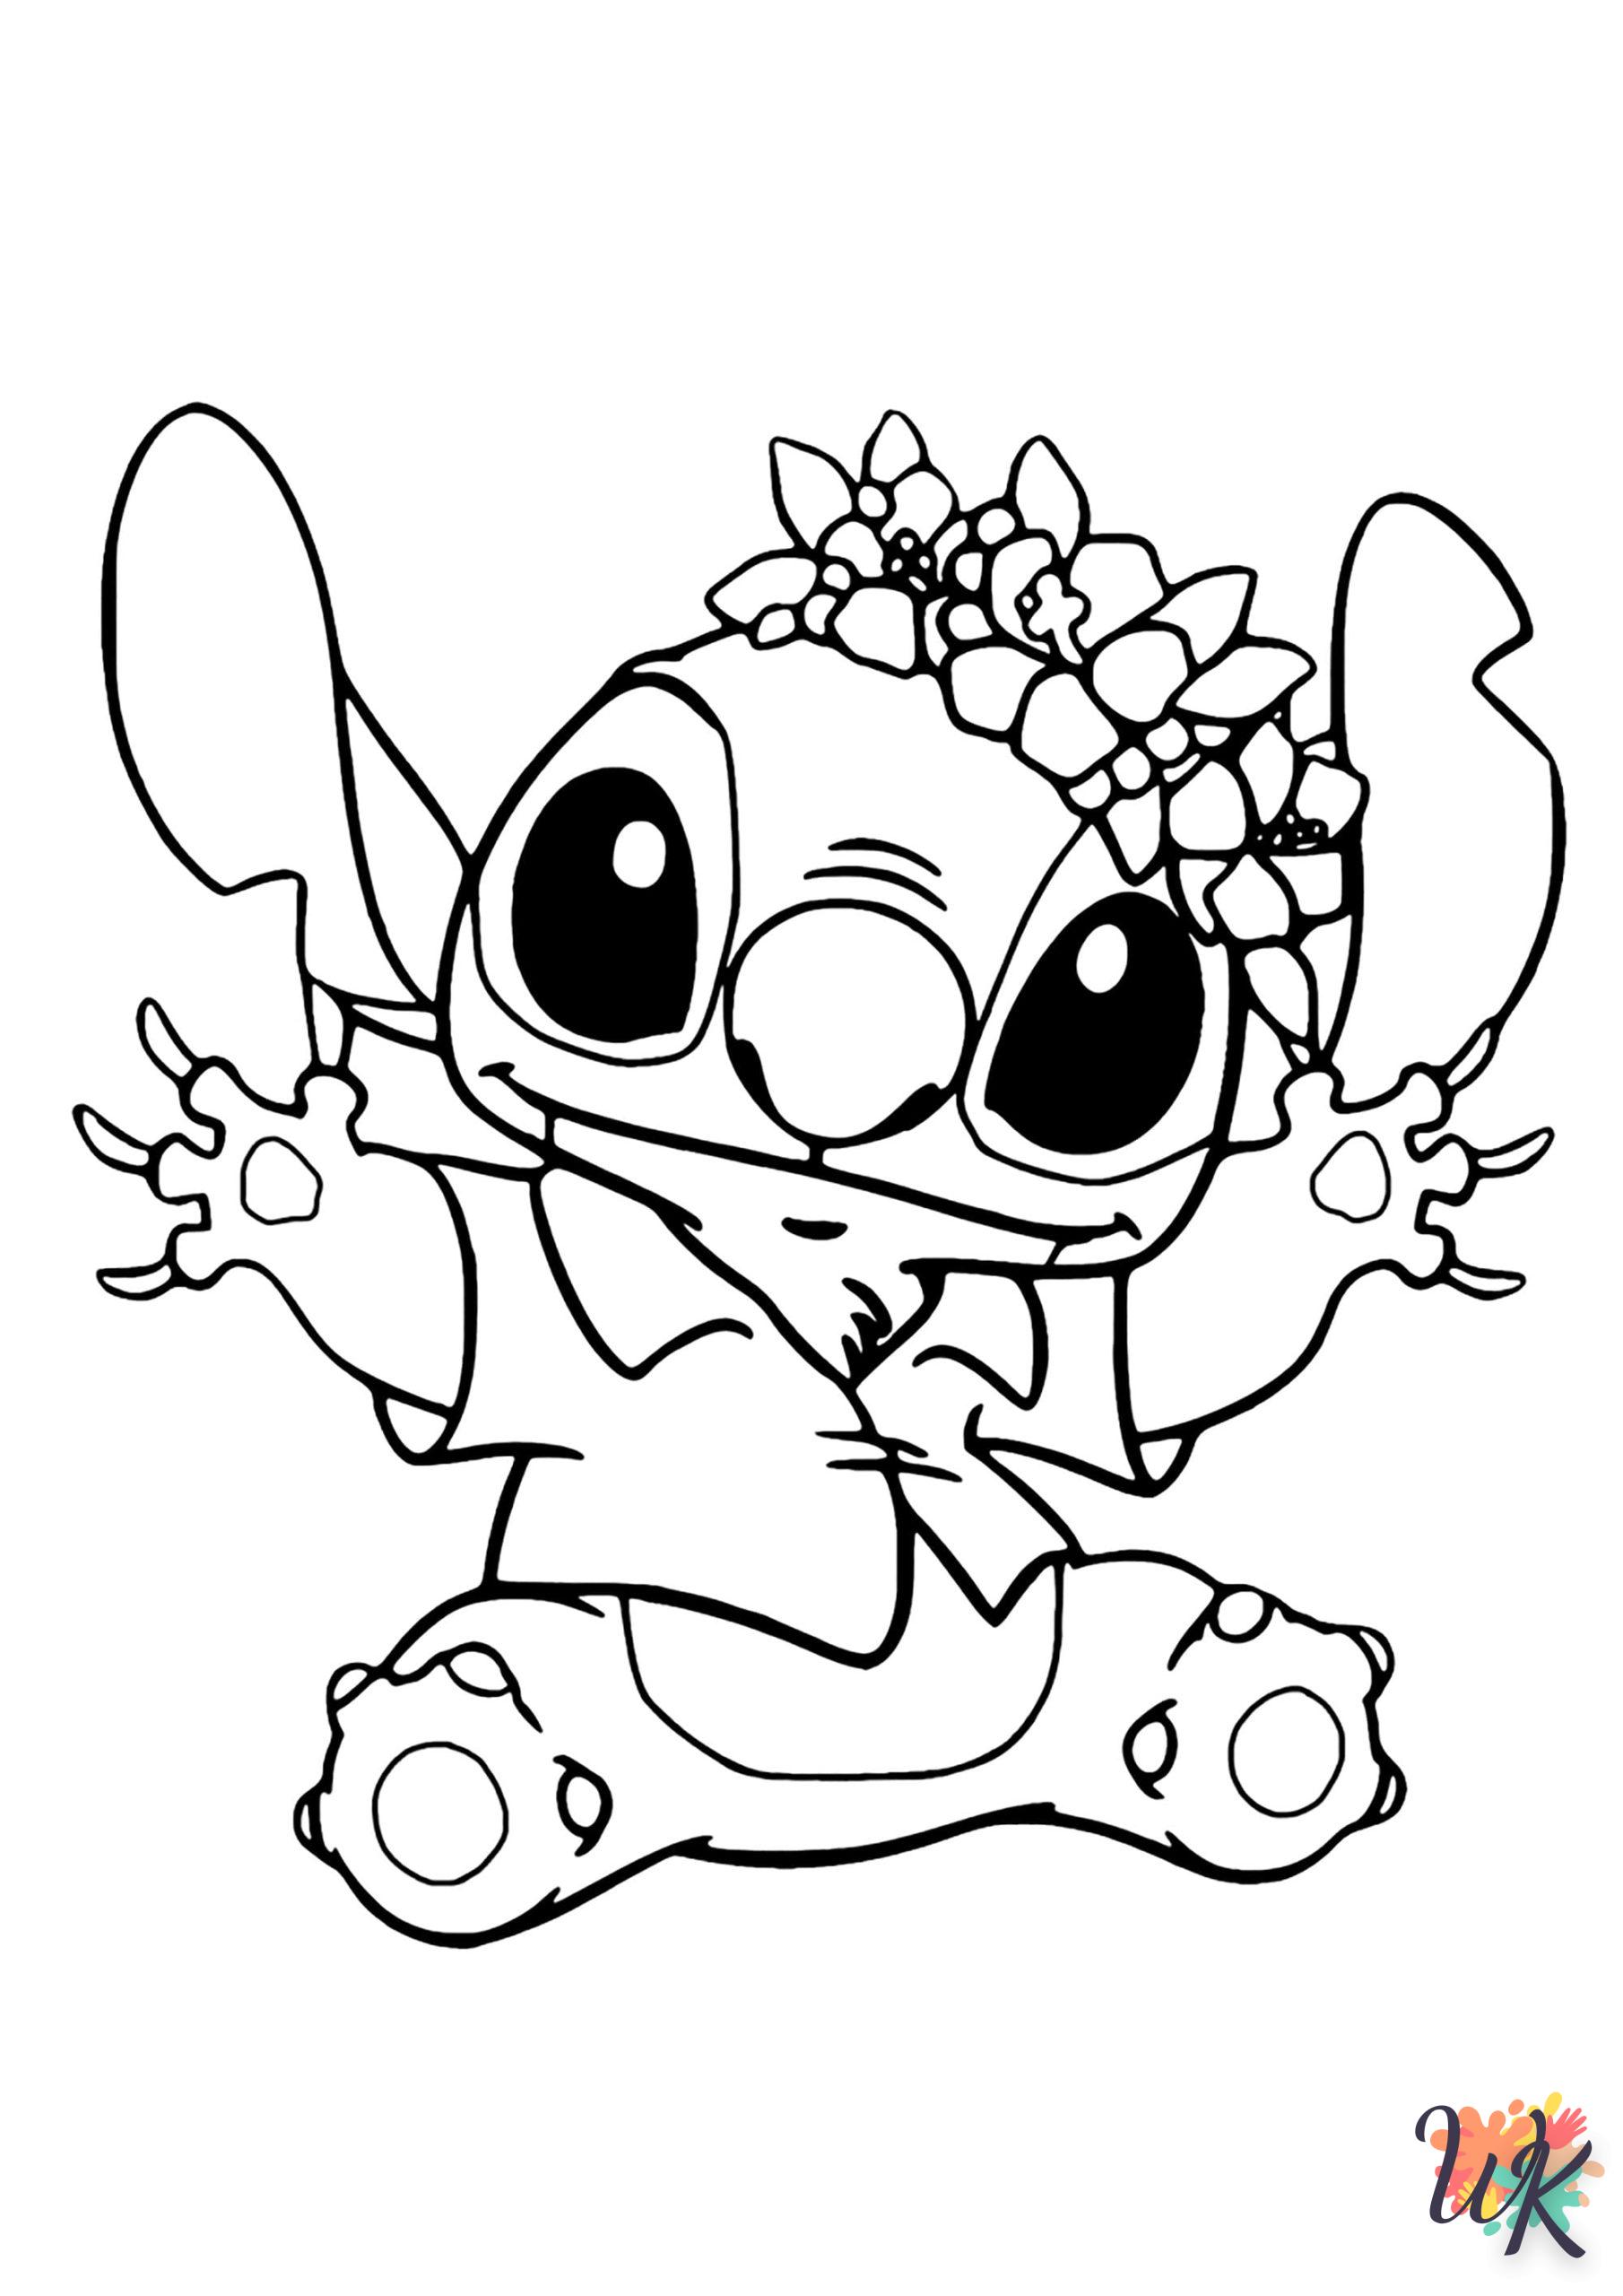 Disney coloring for children to print pdf 5